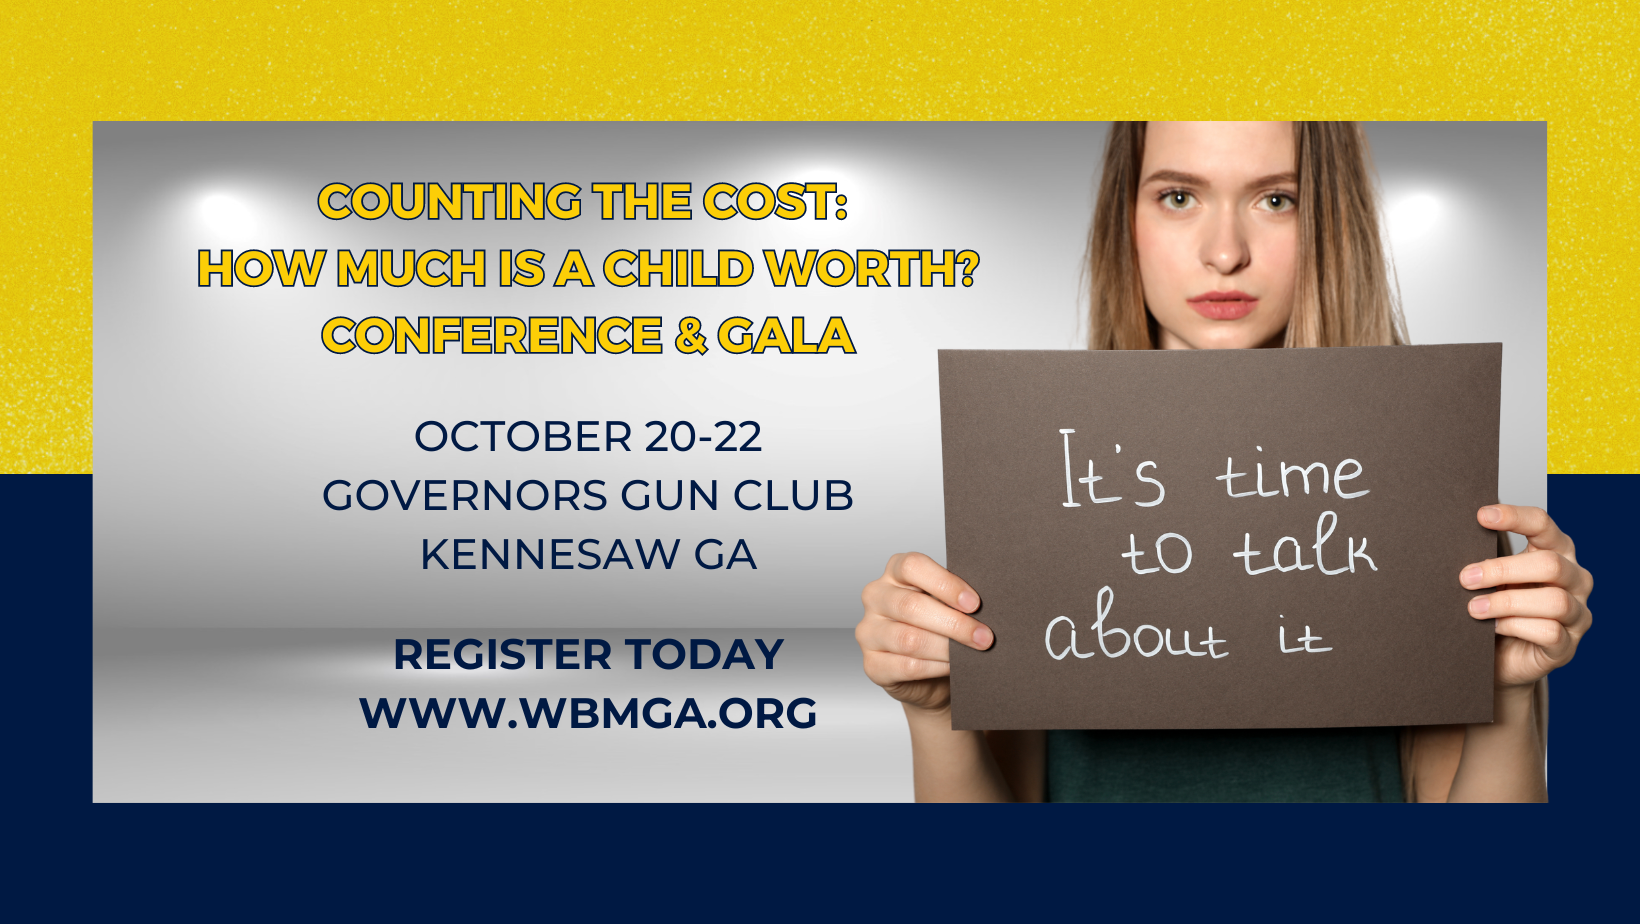 Counting the Cost Conference & Gala